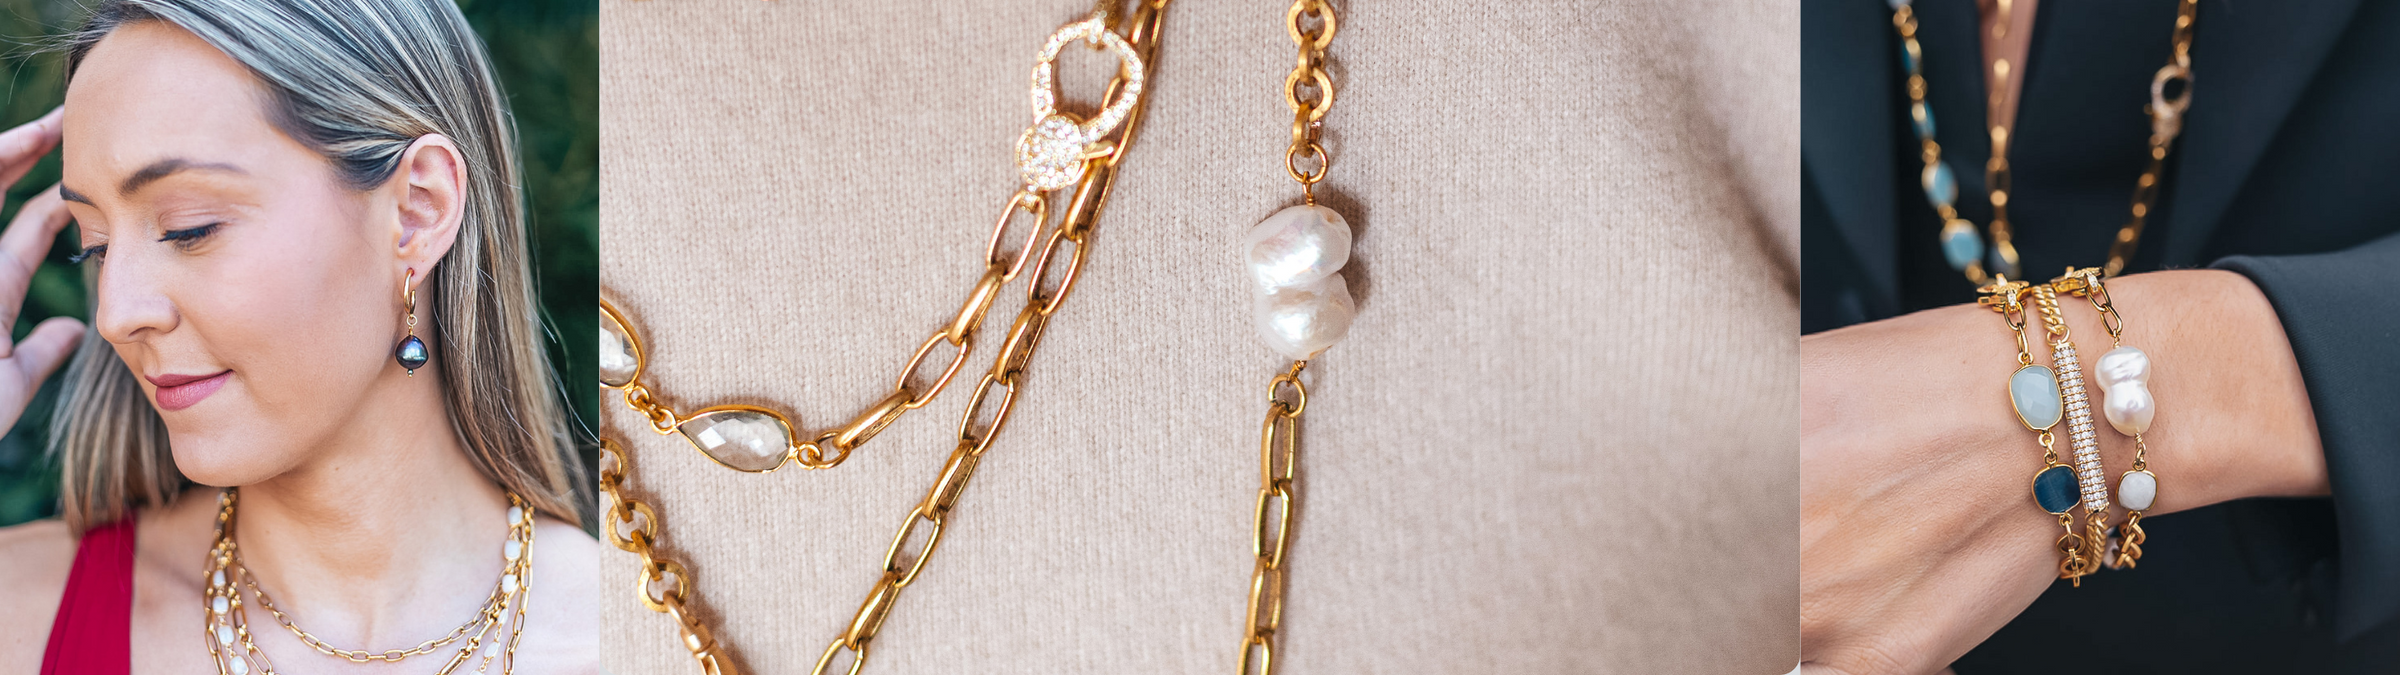 Loni Paul's pearls – a modern twist on a timeless classic, handcrafted with love.